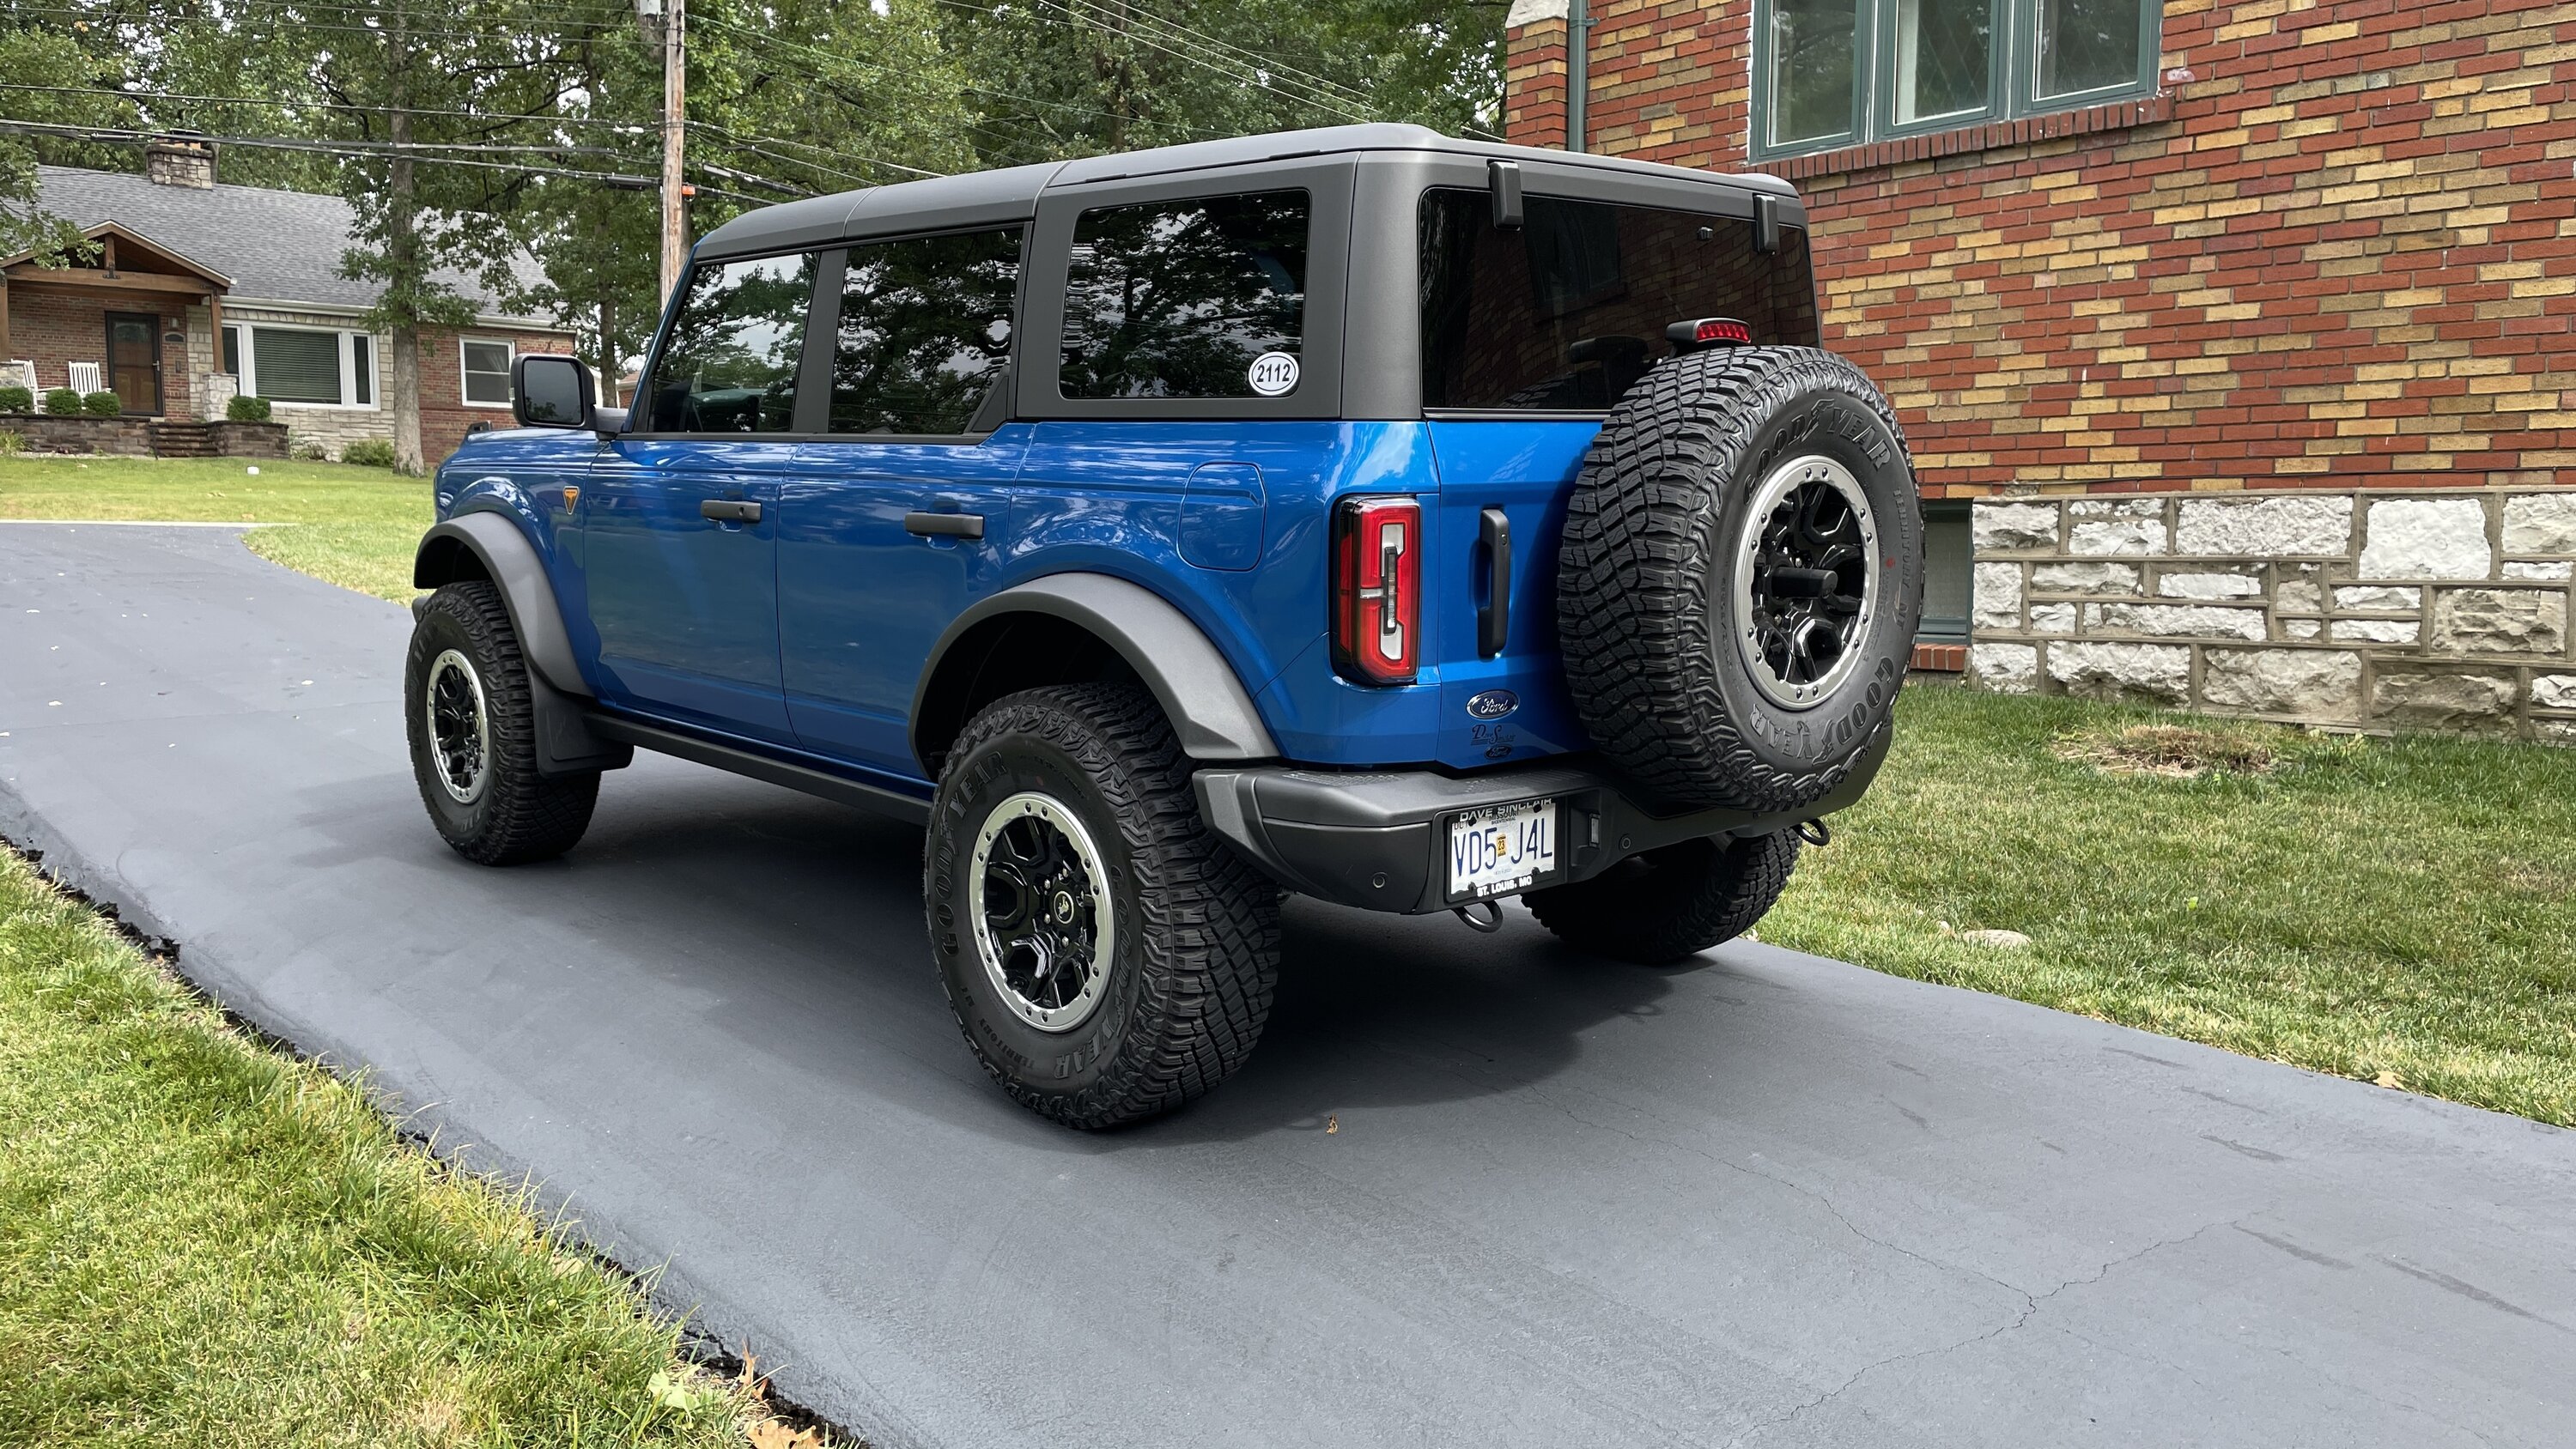 Ford Bronco Mabett front mud flaps installed IMG_2309.JPG